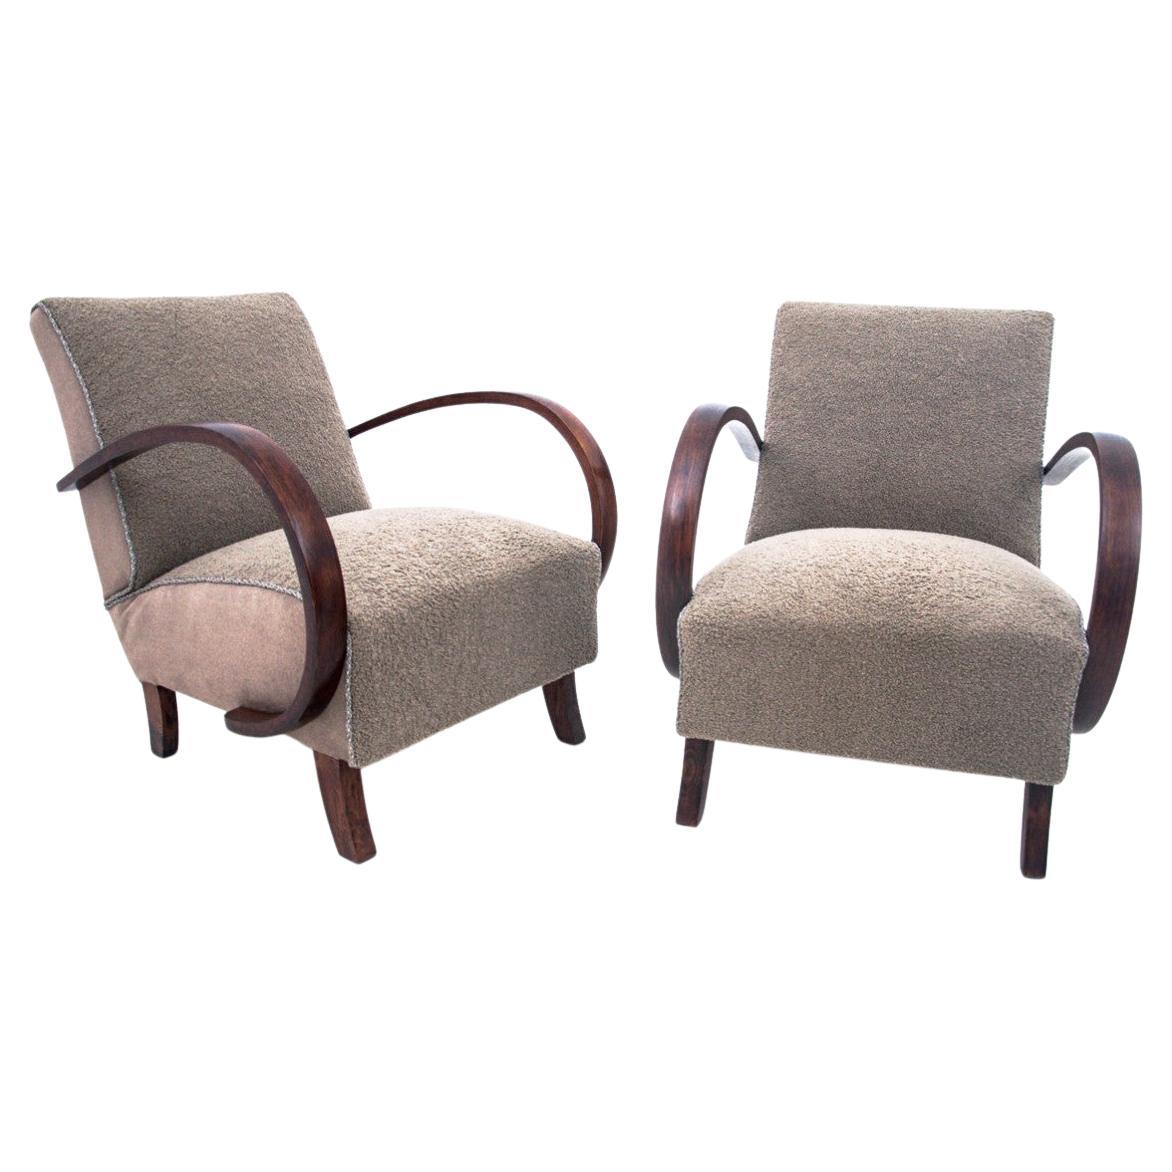 Pair of Art Deco Armchairs by J. Halabala from the 1930s, Czechoslovakia For Sale